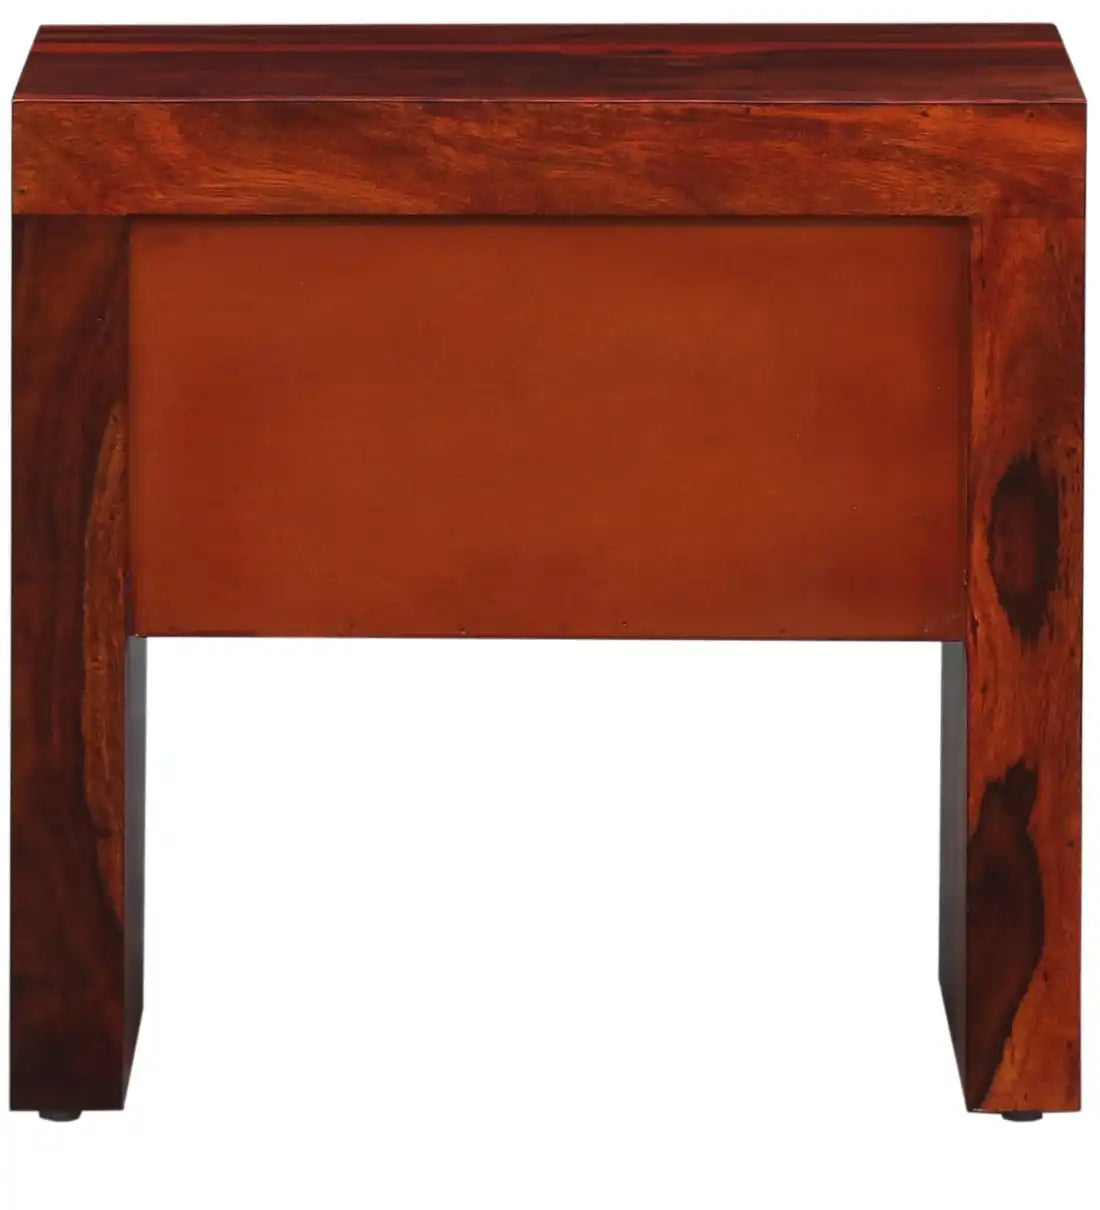 Ontorio Solid Wood Bedside Table For Bedroom